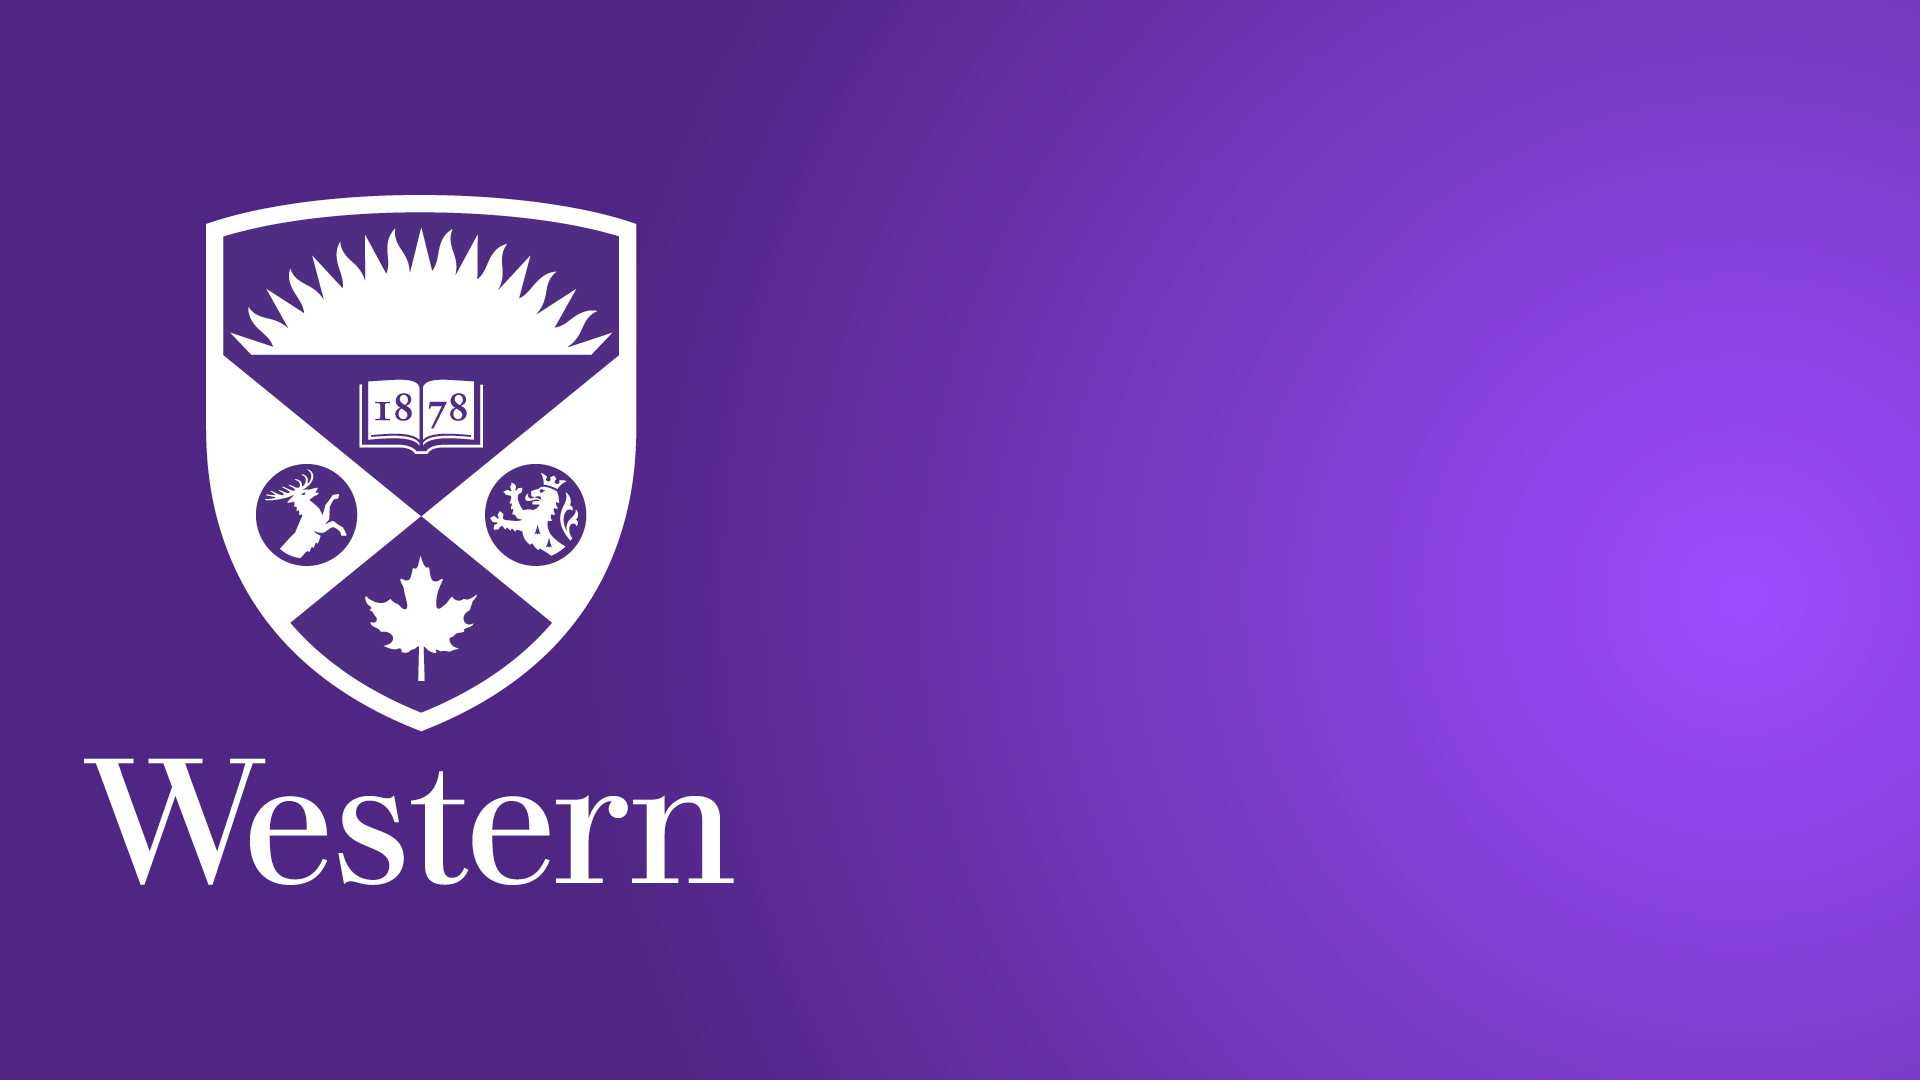 Western crest on left side against a purple background